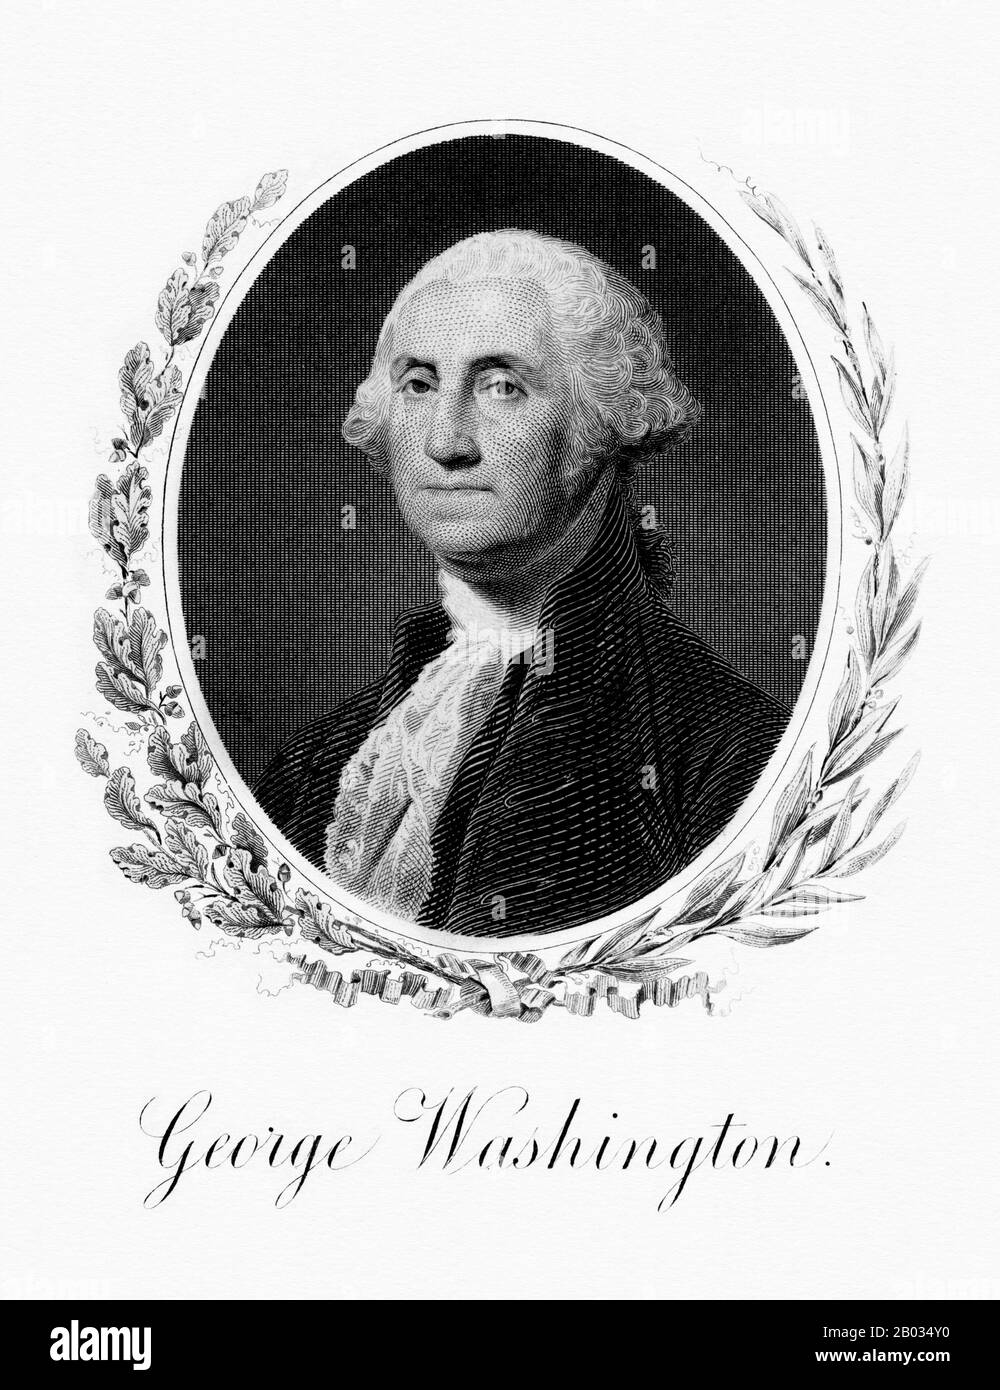 George Washington (February 22, 1732 – December 14, 1799) was the first President of the United States (1789–97), the Commander-in-Chief of the Continental Army during the American Revolutionary War, and one of the Founding Fathers of the United States.  He presided over the convention that drafted the current United States Constitution and during his lifetime was called the 'father of his country'. Stock Photo